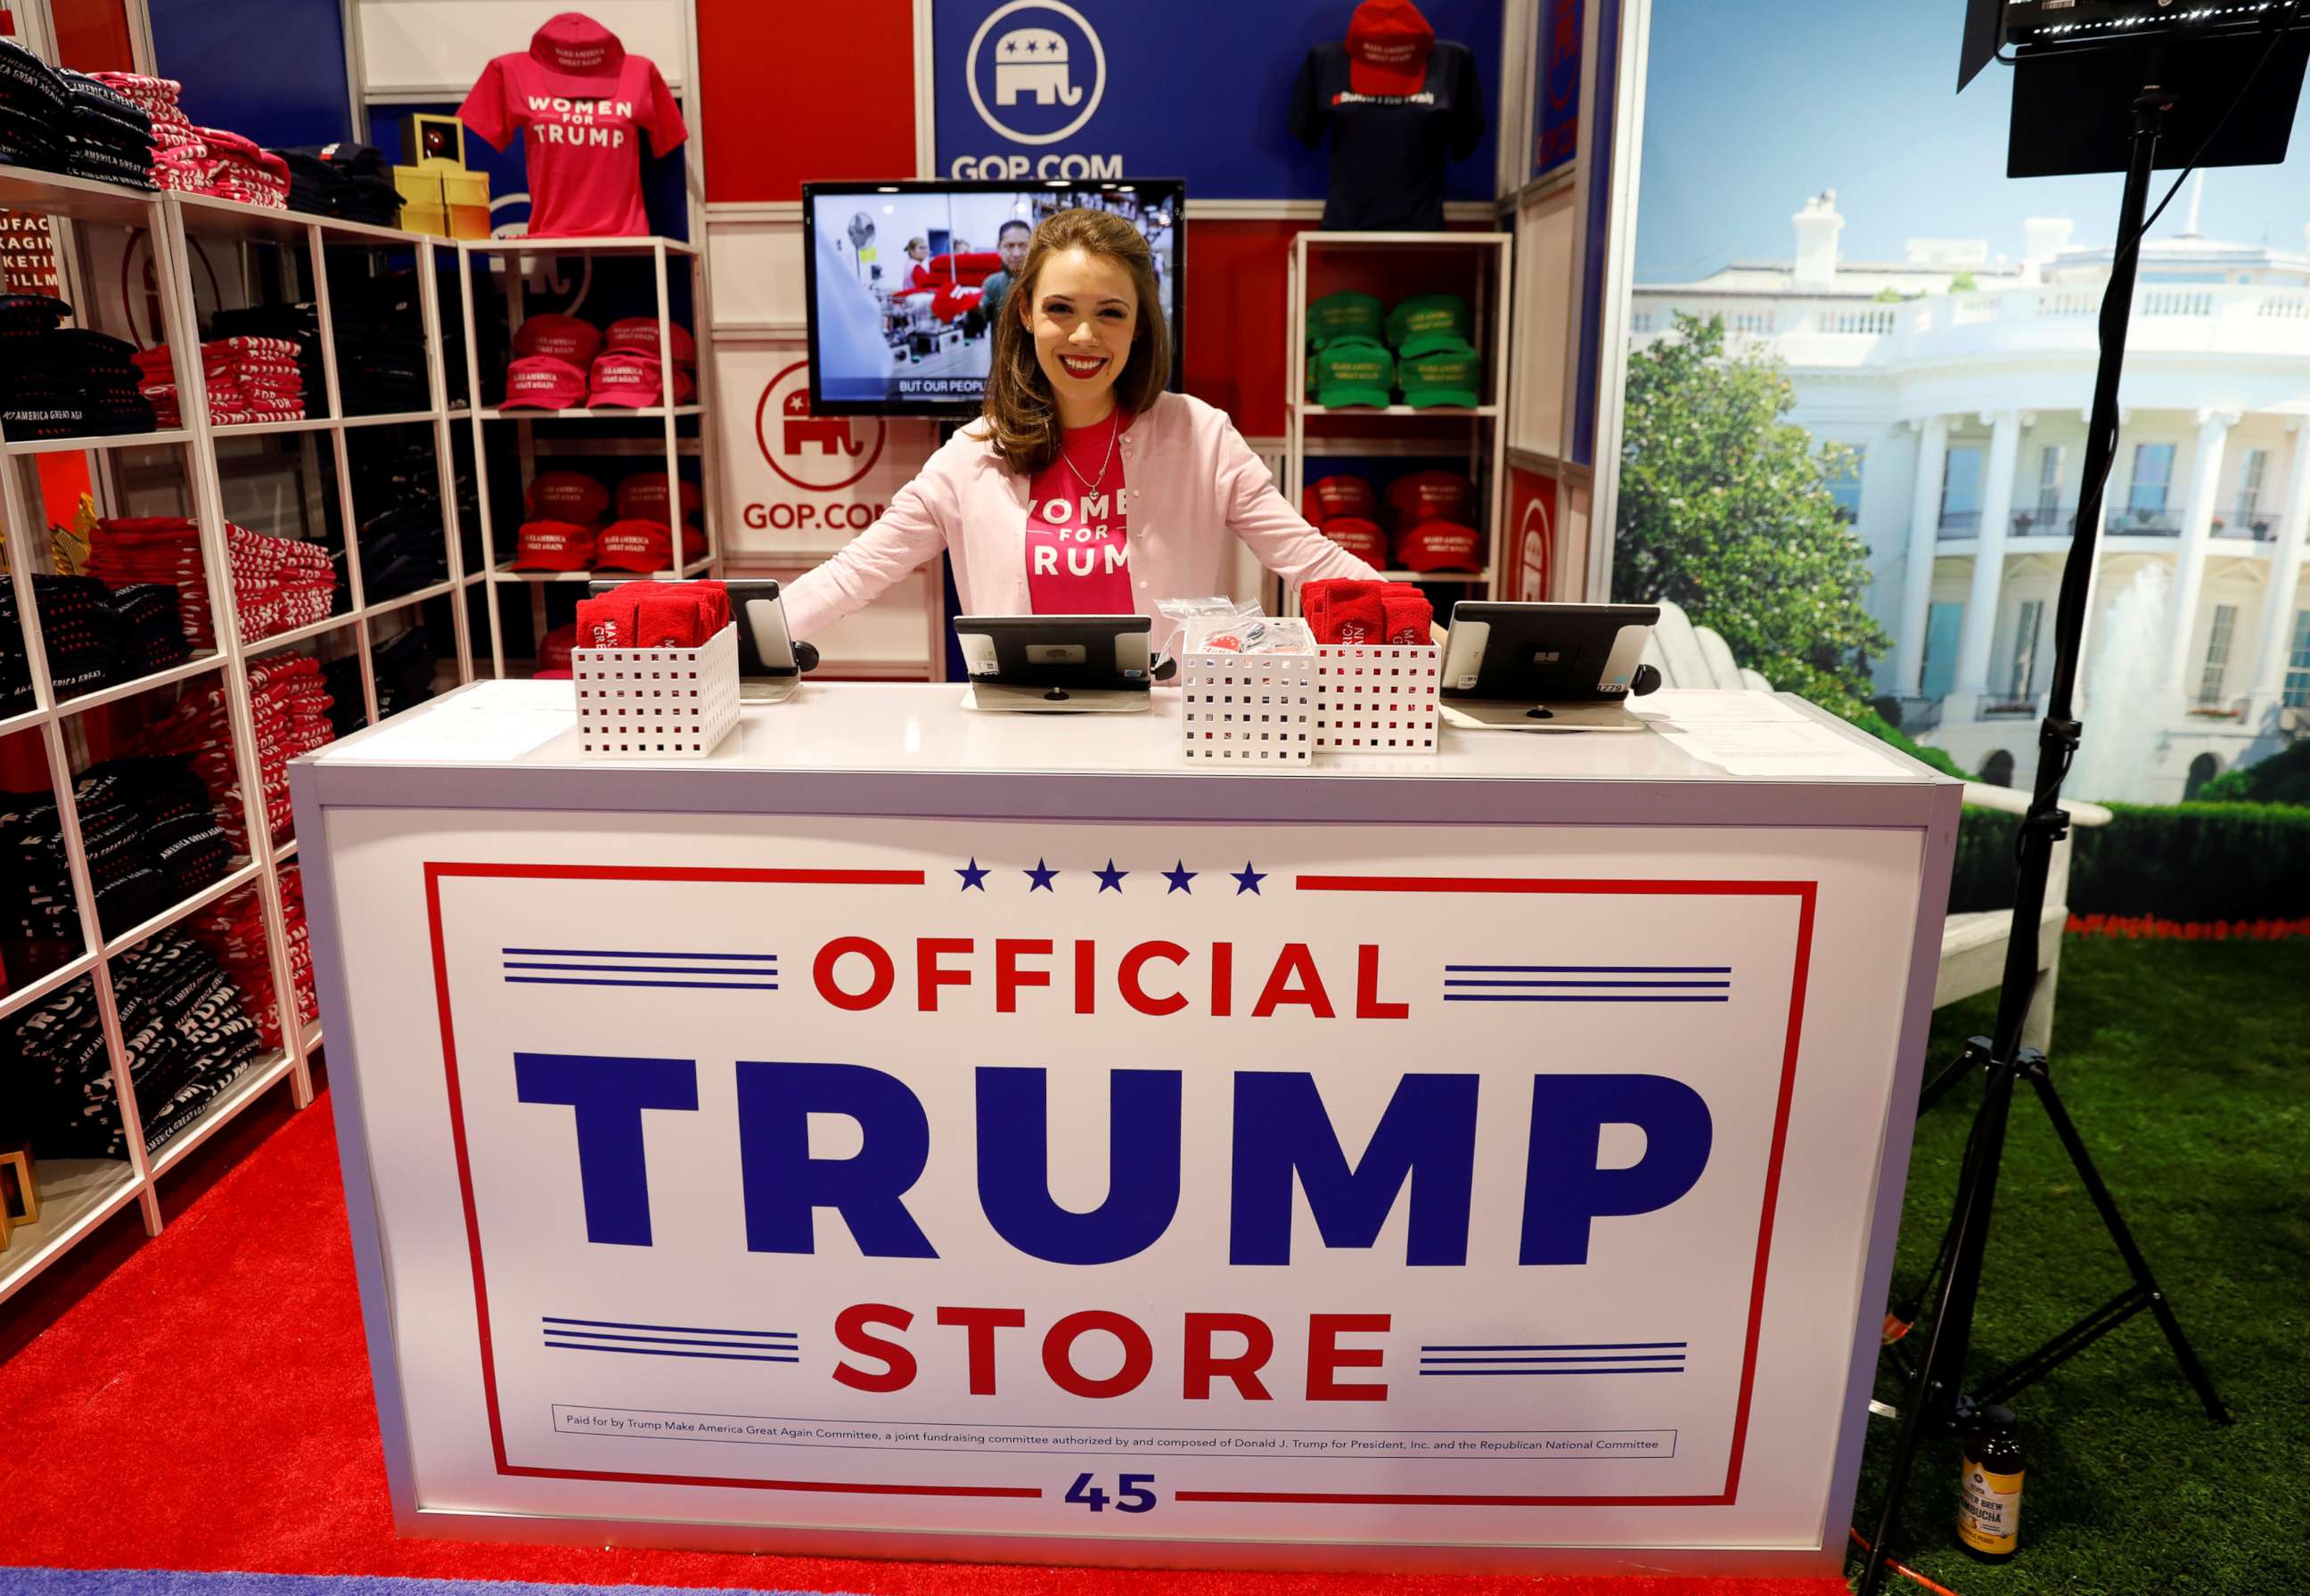 PHOTO: Merritt Corrigan tends the Official Trump Store at the Conservative Political Action Conference (CPAC) at National Harbor, Maryland, Feb. 22, 2018.